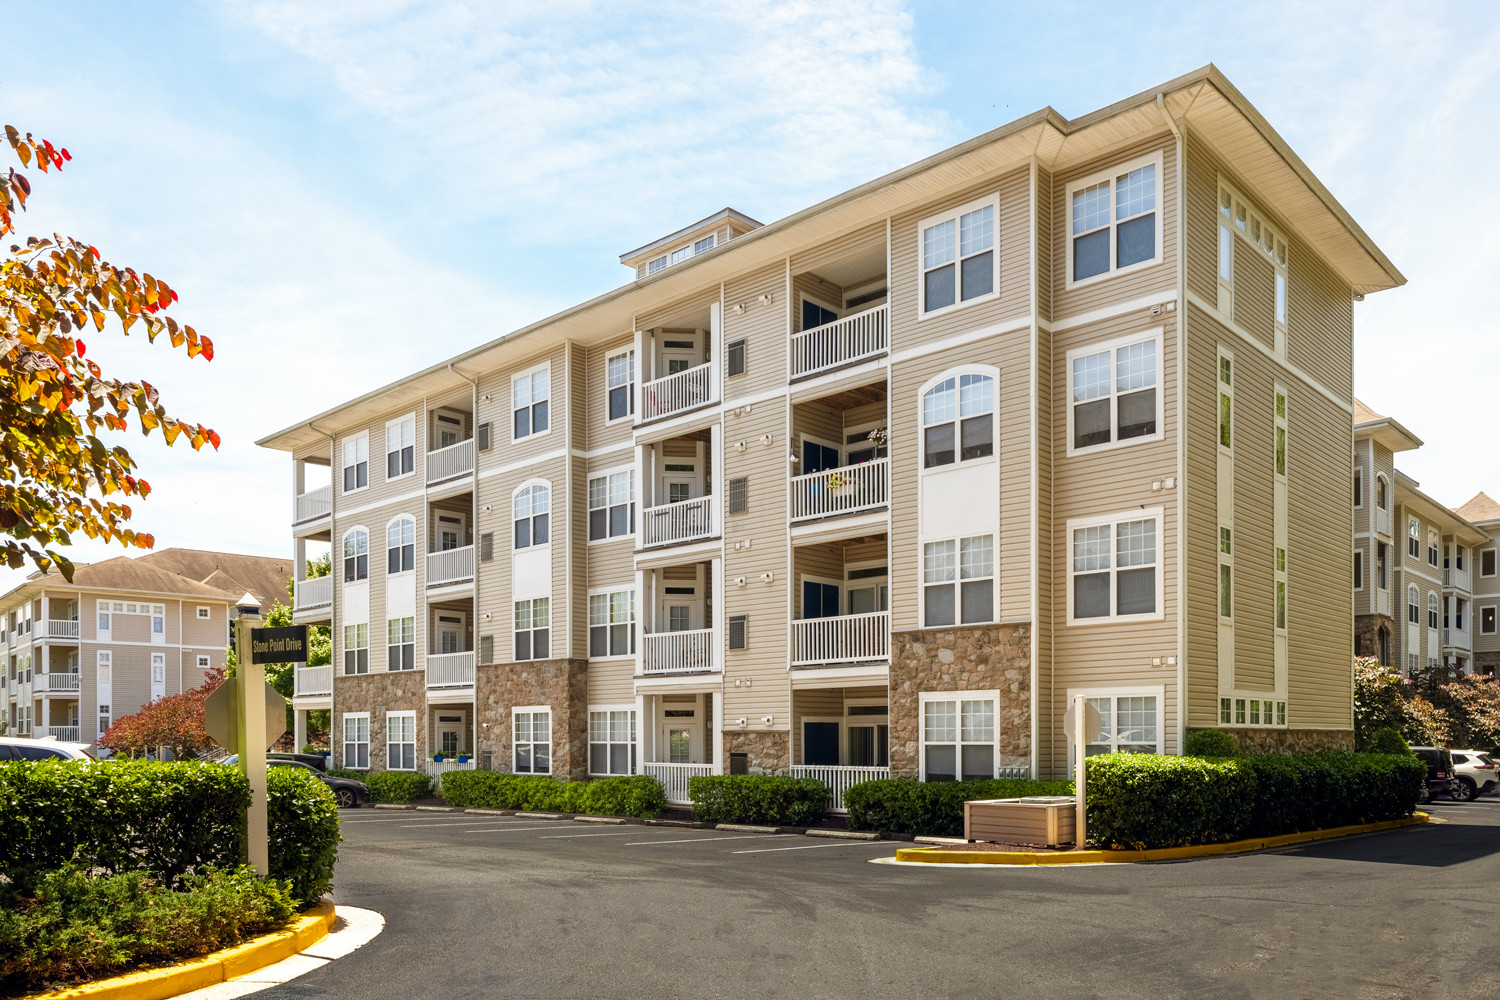 Stone Point Apartments : Spacious apartment homes located in Annapolis